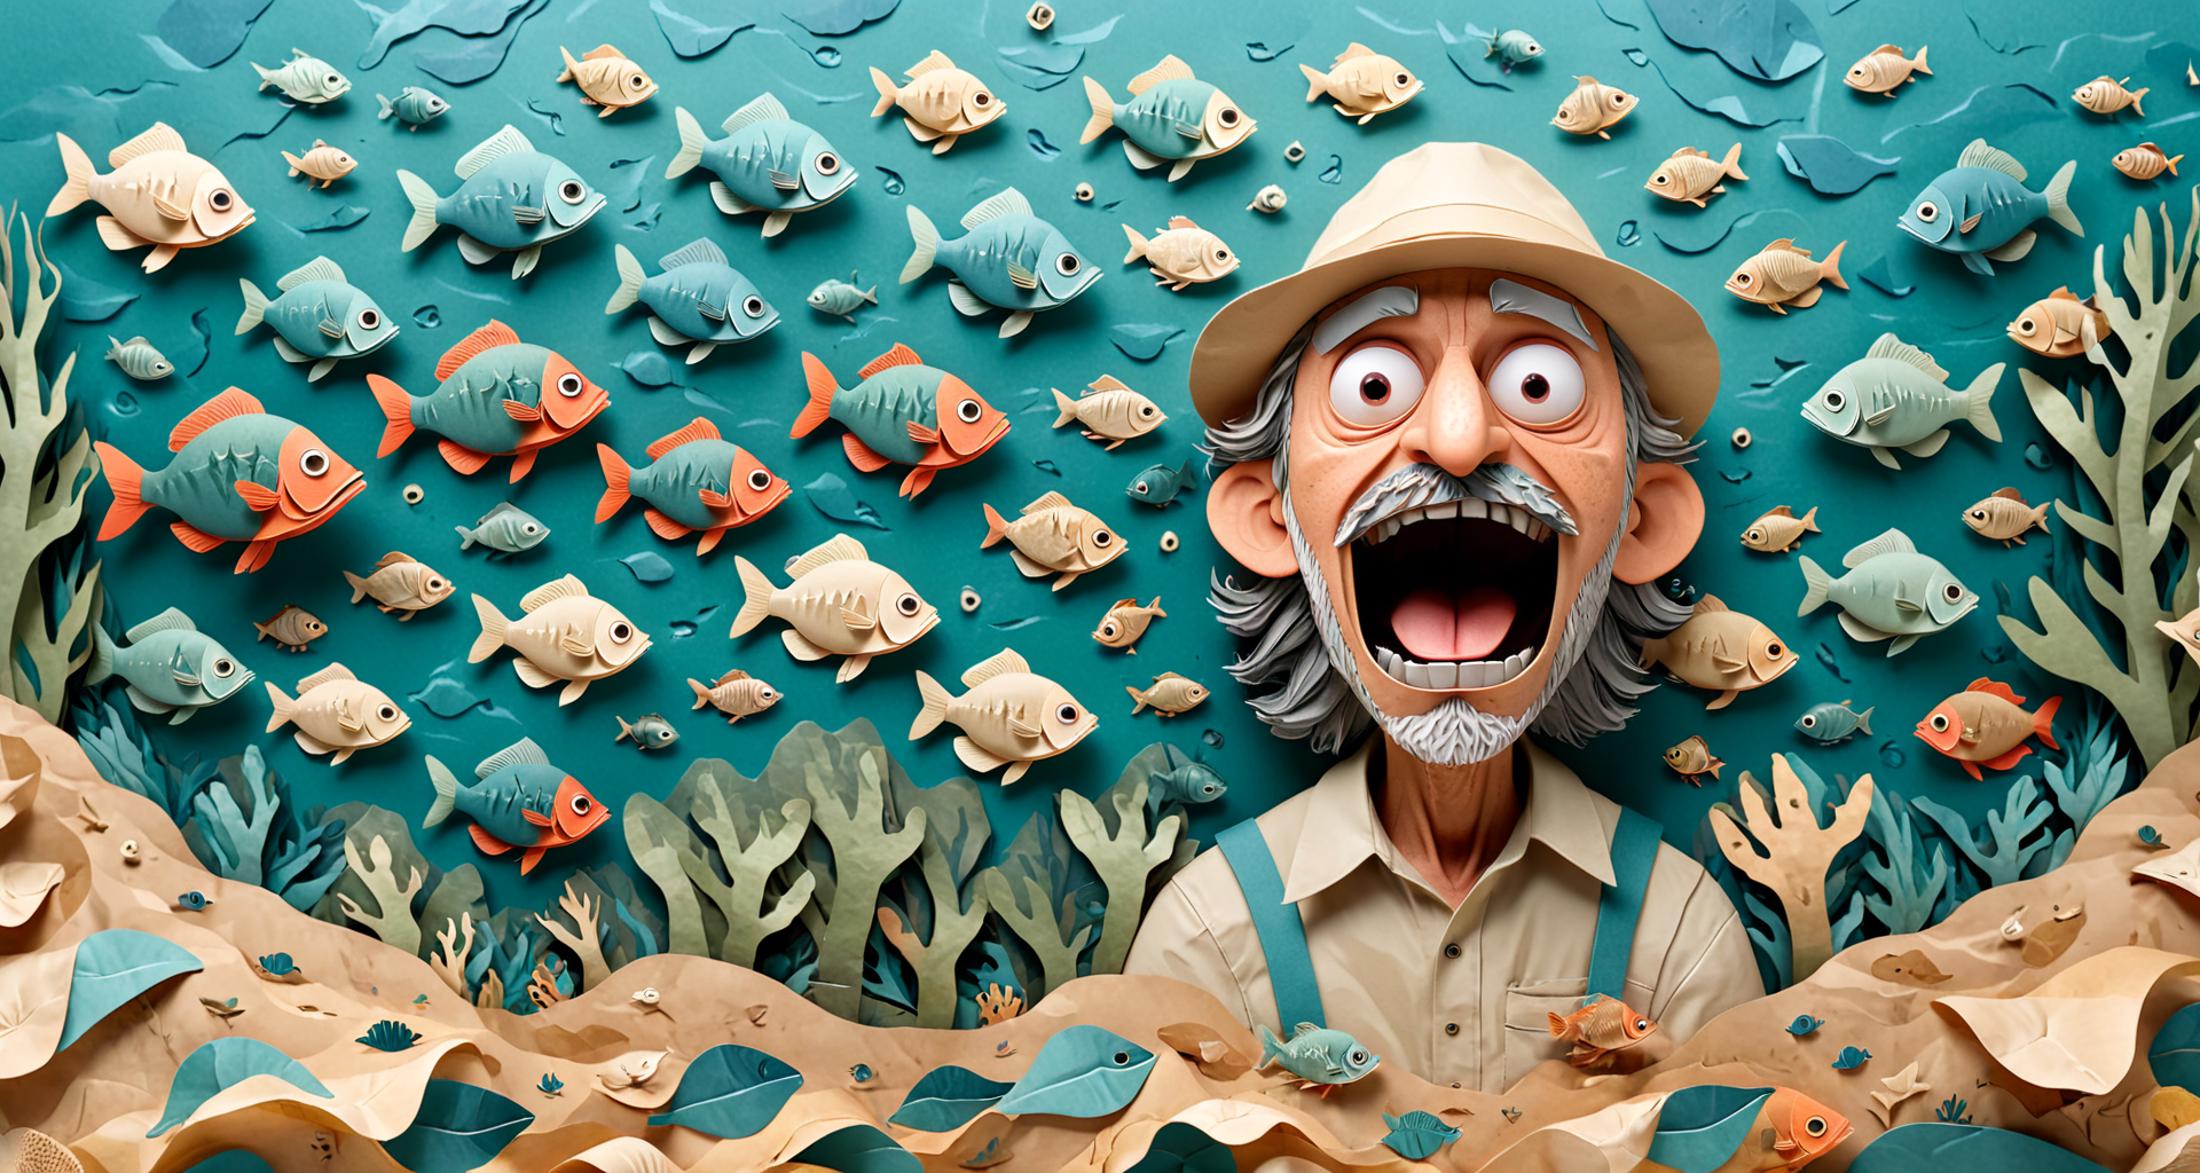 A man yelling in front of a wall filled with fish cutouts.